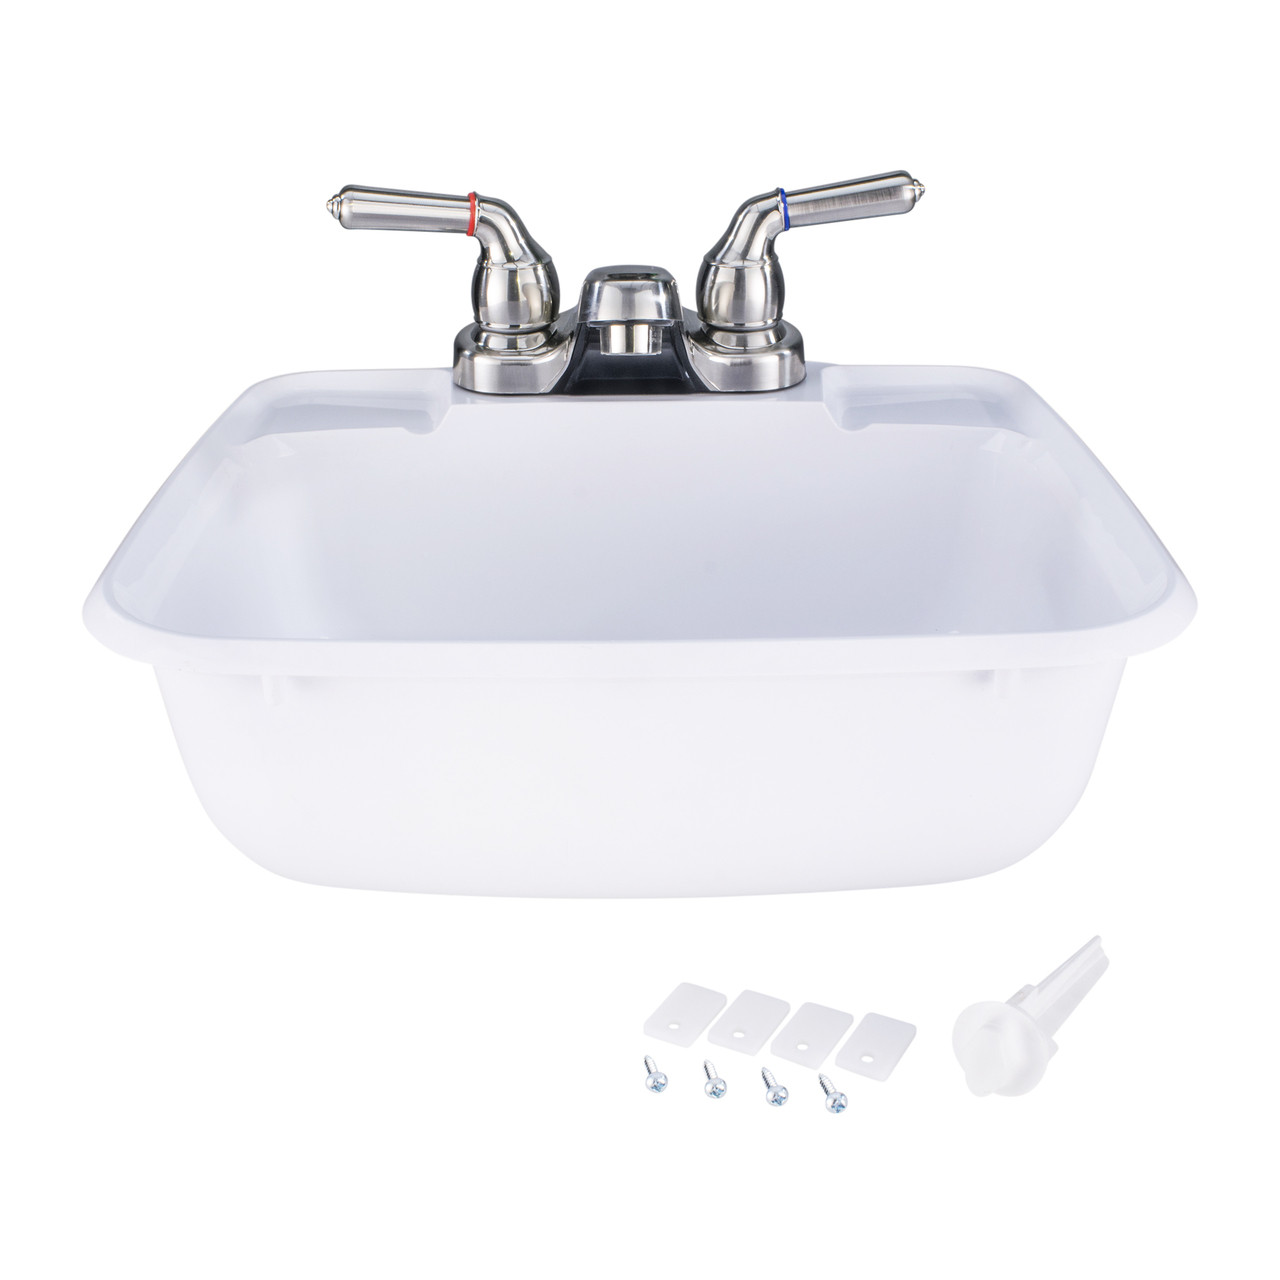 White Square Sink Combo W Faucet Hardware Front  61825.1526477303 ?c=2